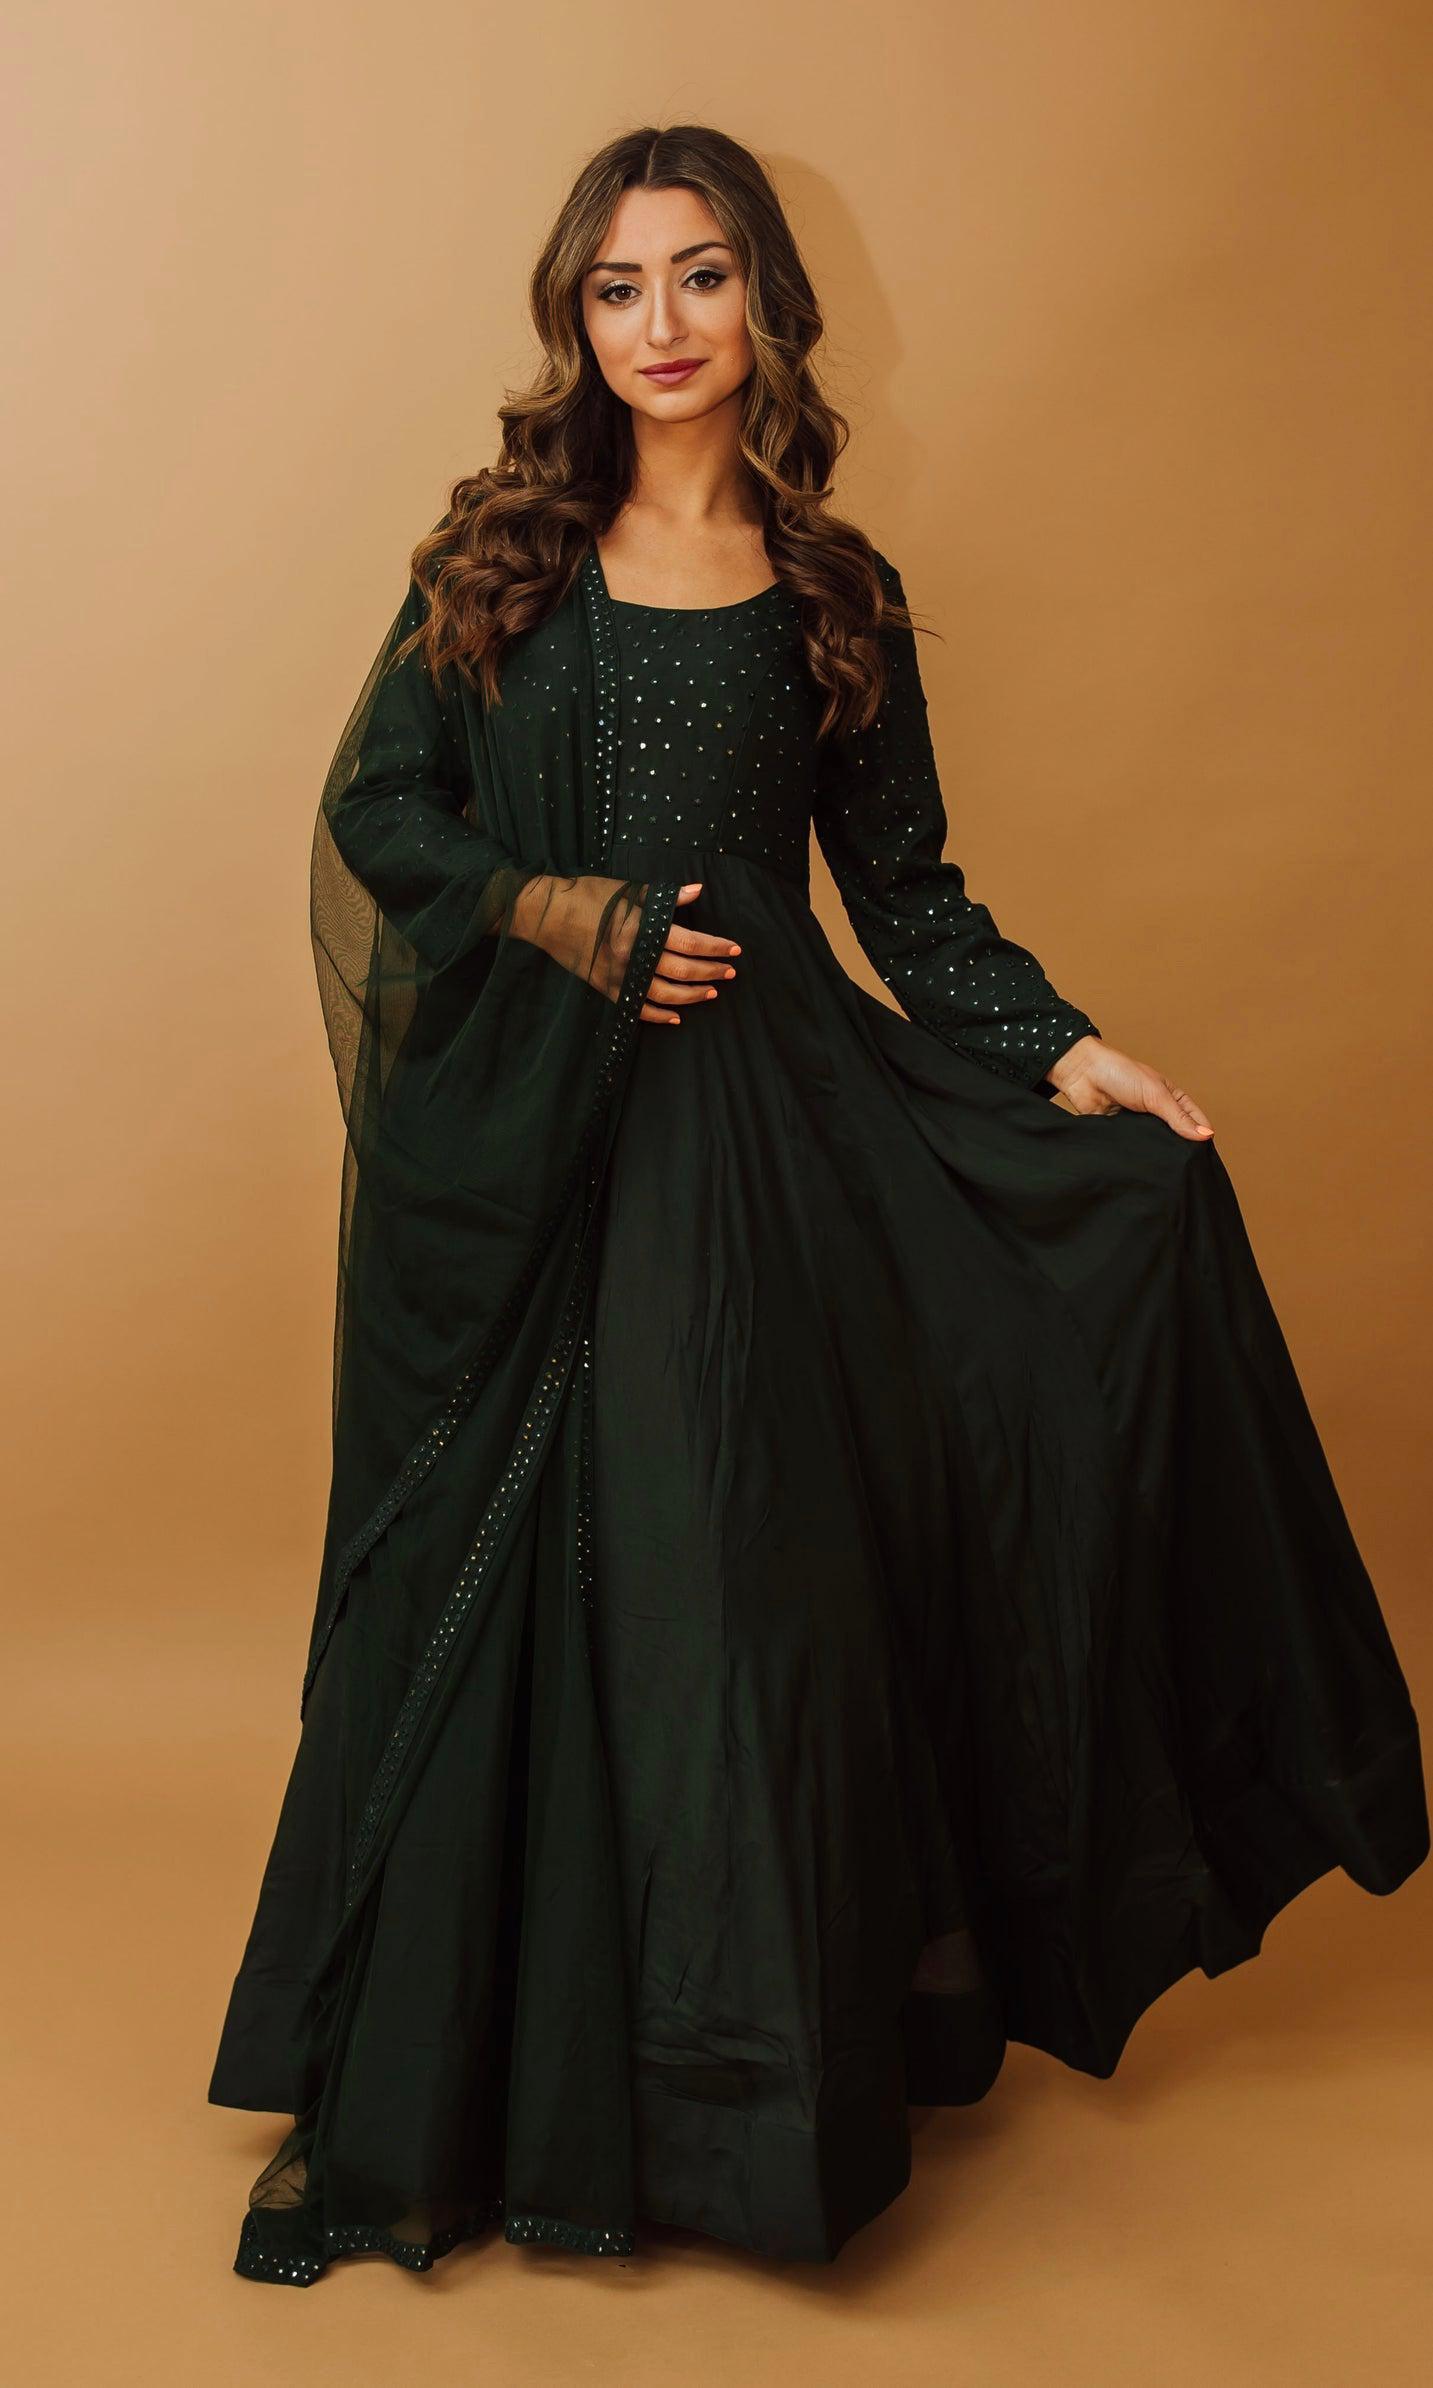 Green Gown - Buy Green Gowns Online in India | Myntra